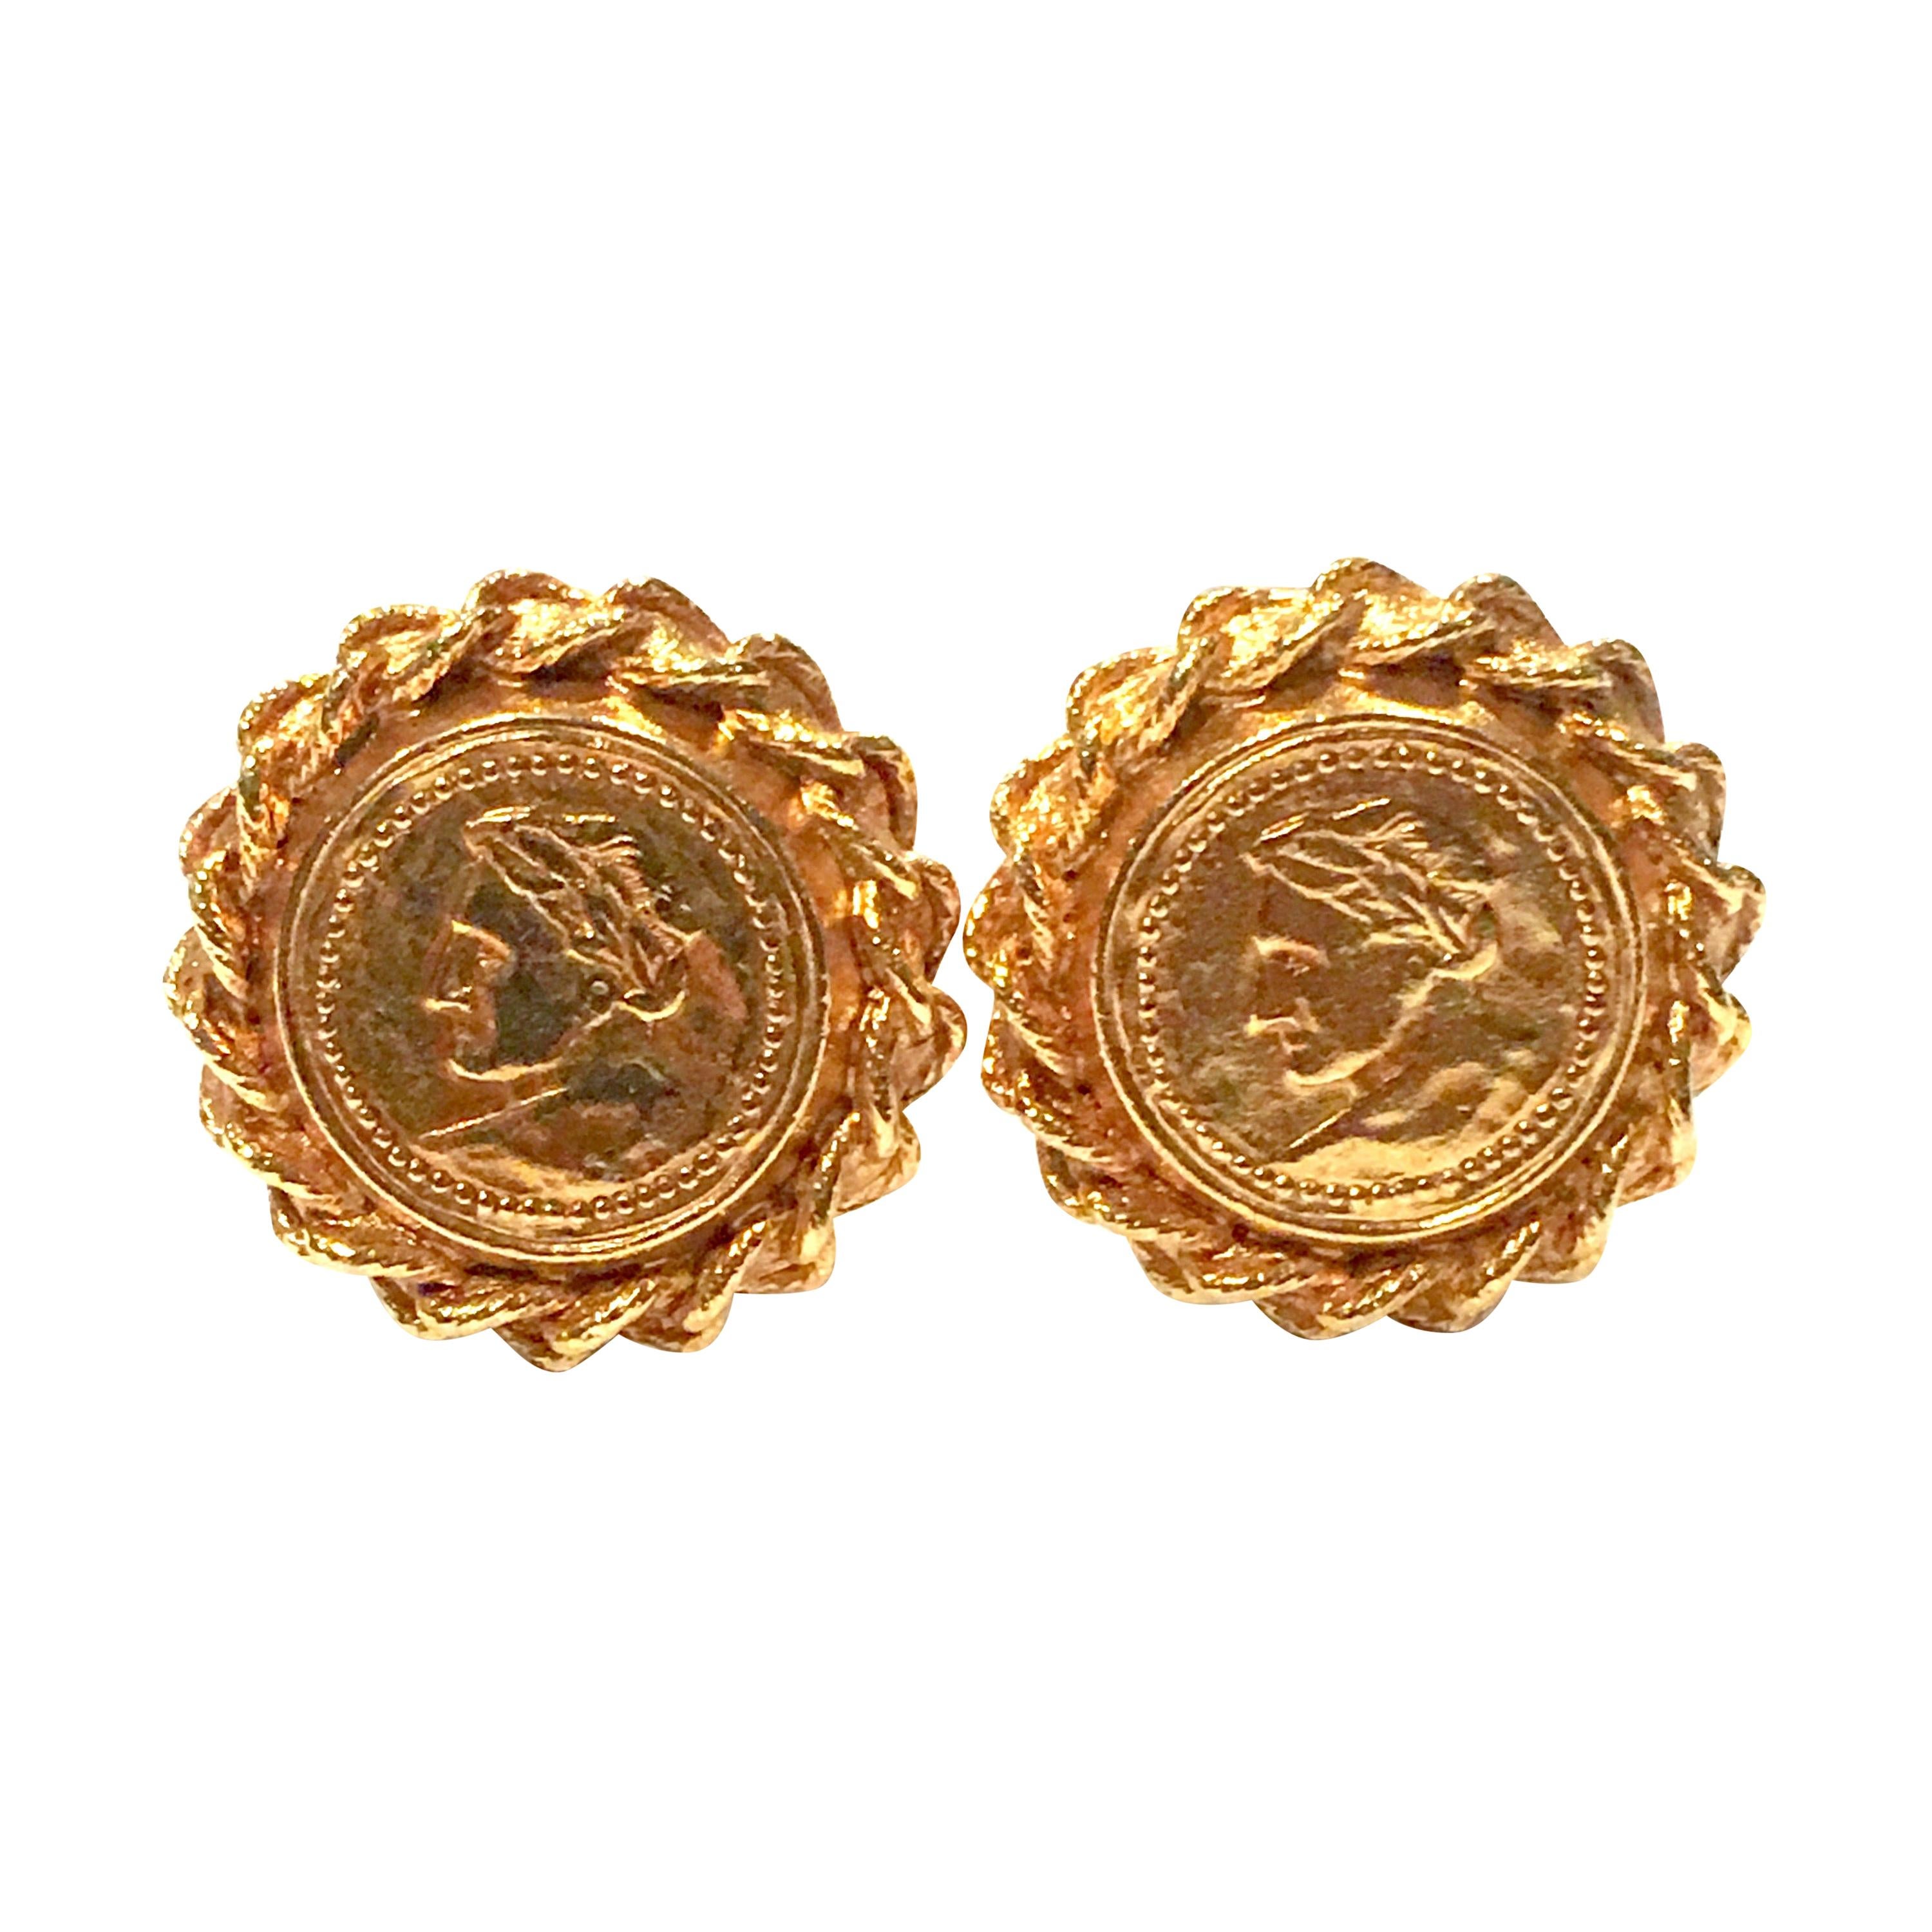 20th Century Gold Plate Roman Coin Pair Of Earrings By, Carlisle For Sale